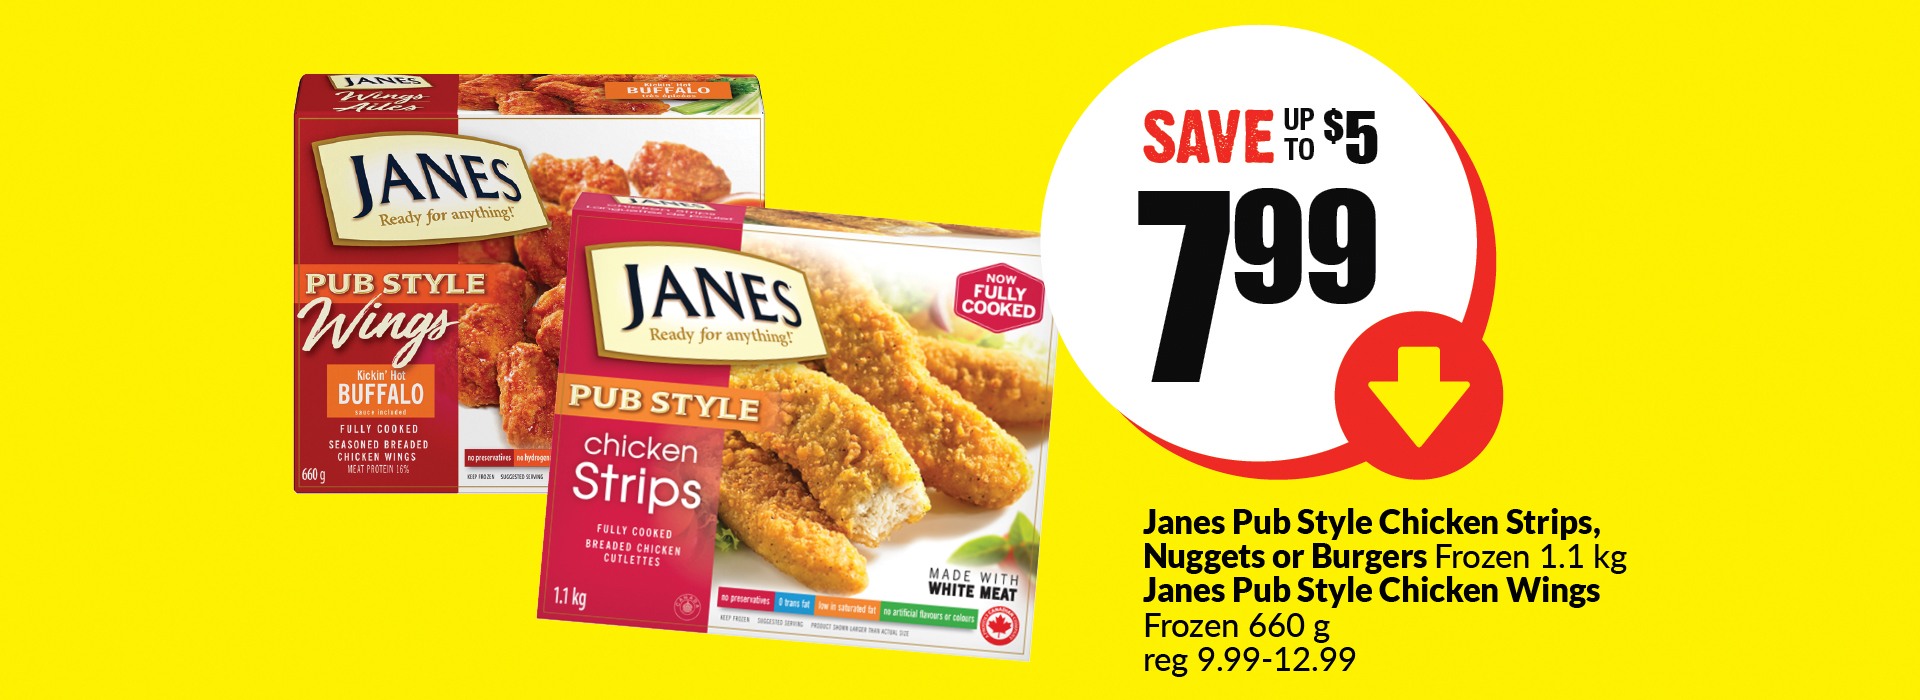 The following image contains the text " Janes pub style chicken strips, Nuggets or Burgers frozen 1.1 kg, Janes pub style chicken Wings frozen 660 g, reg 9.99-12.99. Get them at just $7.99 and save up to $5.